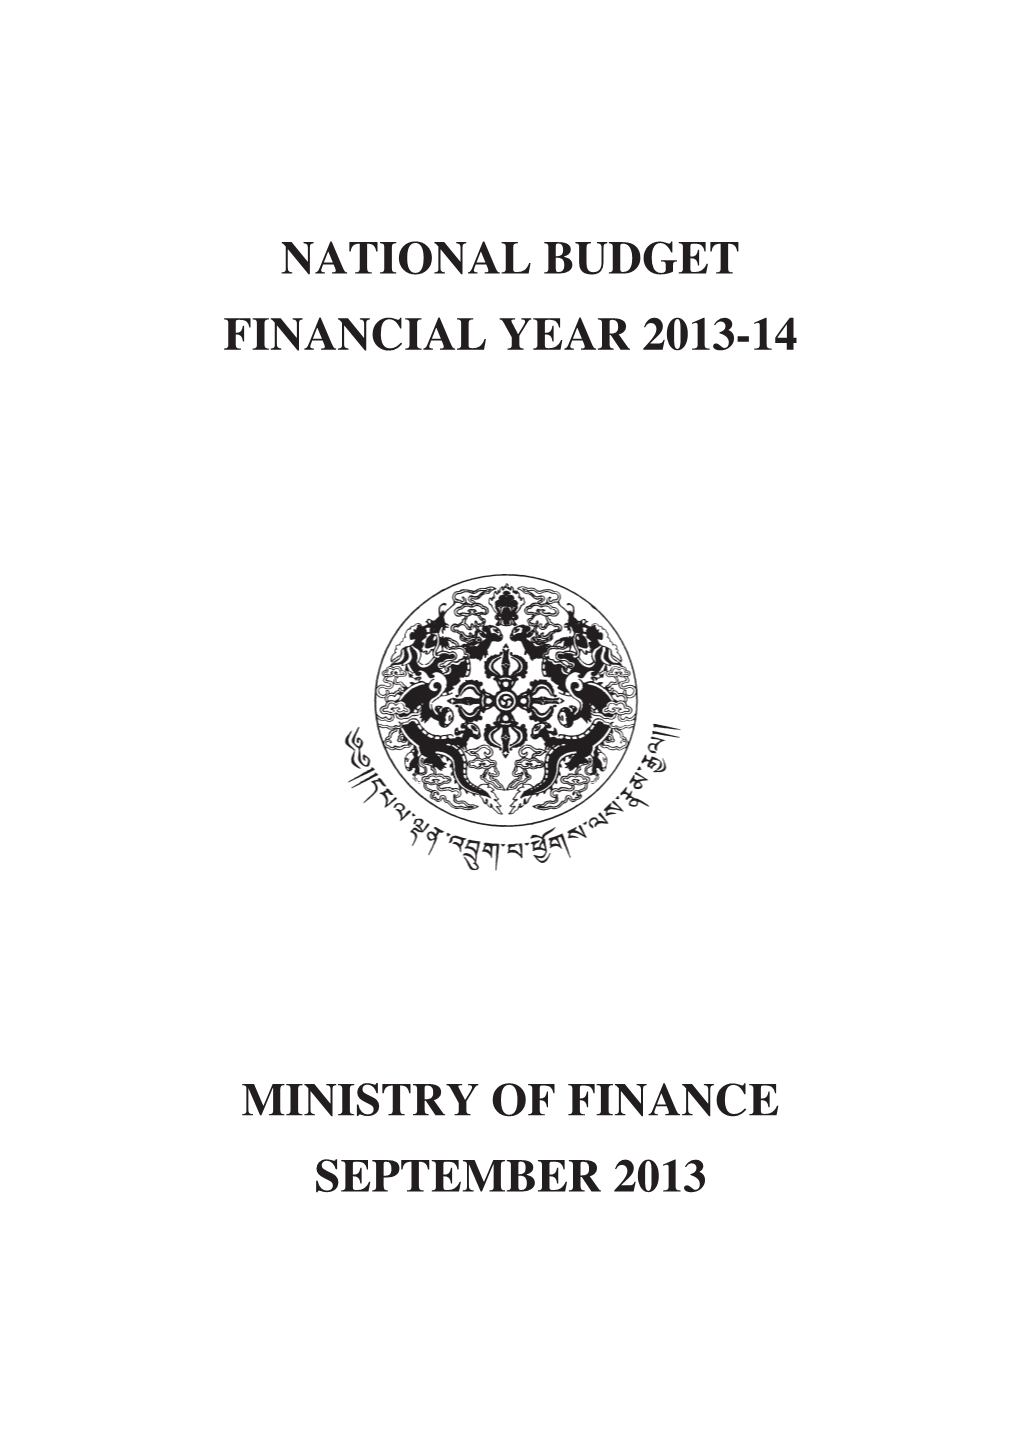 National Budget Financial Year 2013-14 Ministry of Finance